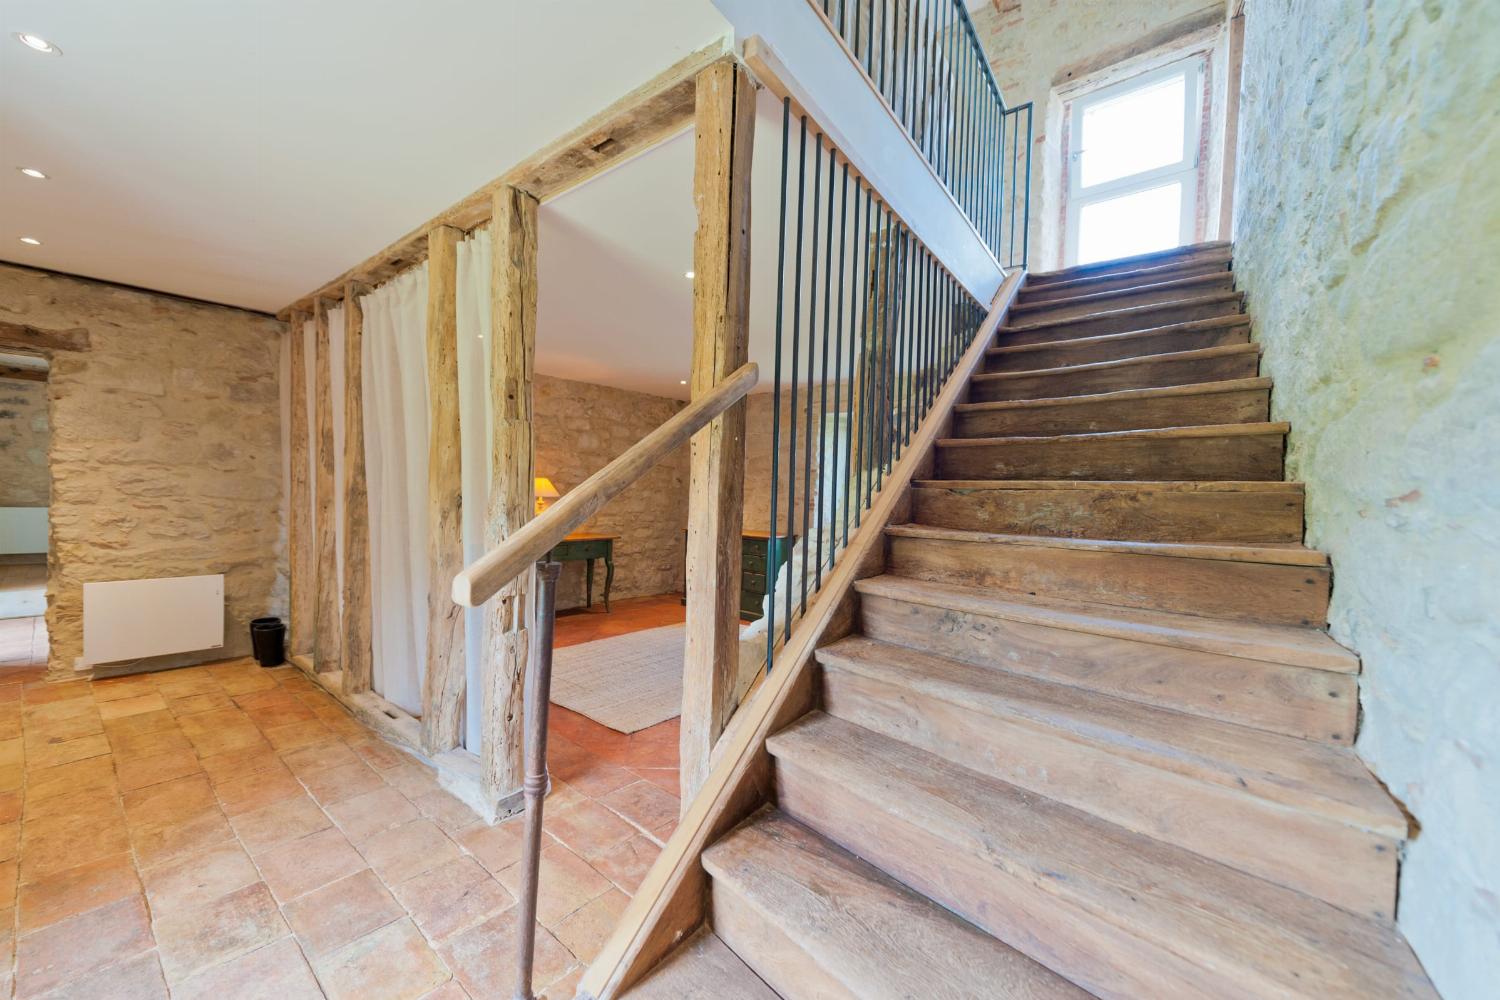 Staircase | Rental home in the Tarn